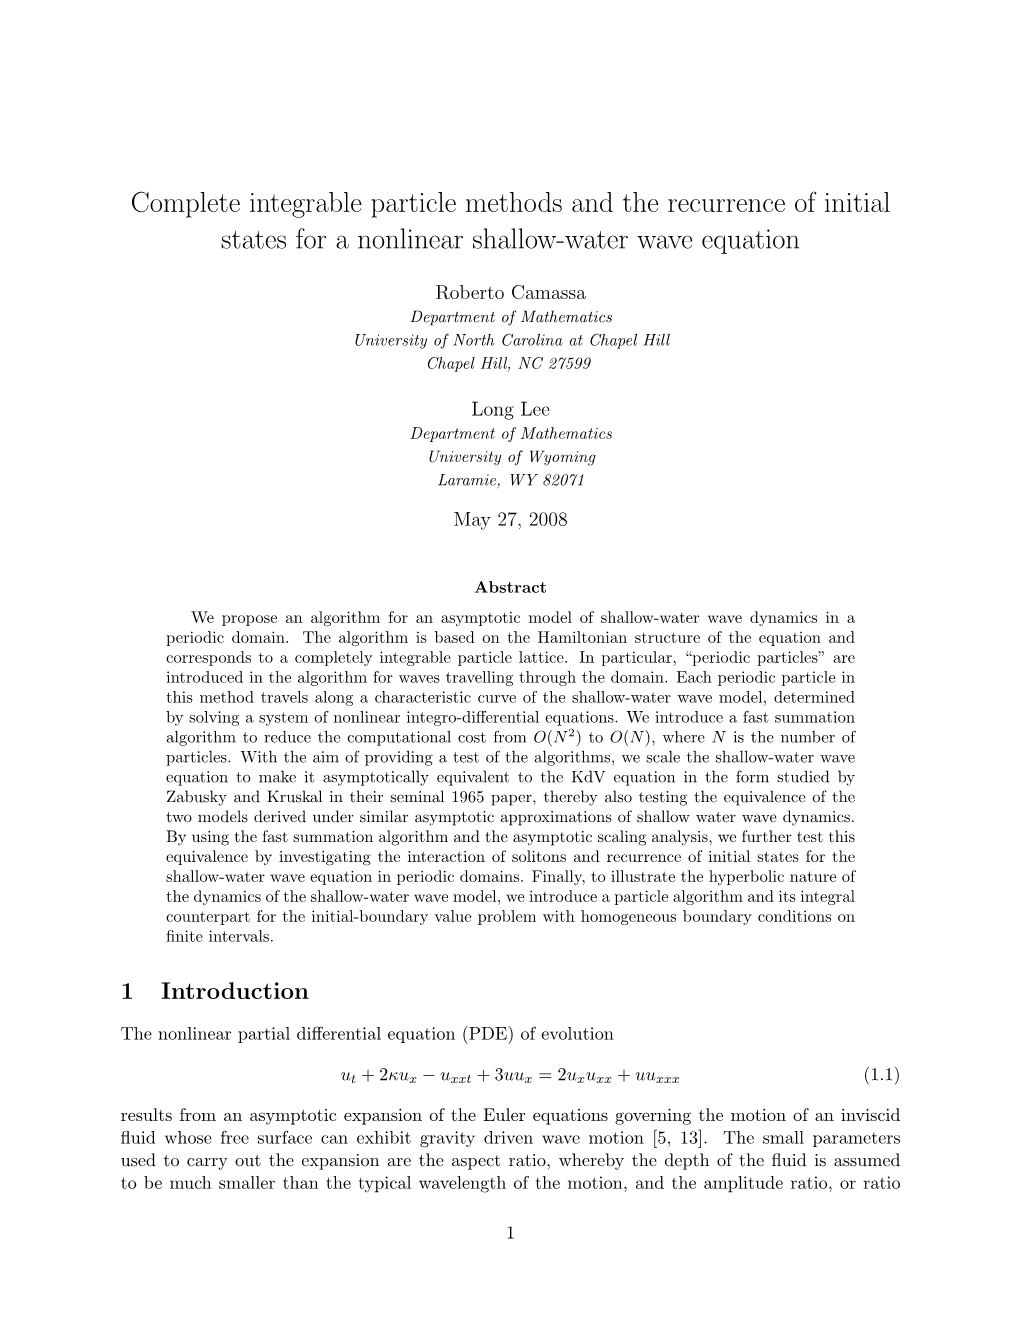 Complete Integrable Particle Methods and the Recurrence of Initial States for a Nonlinear Shallow-Water Wave Equation